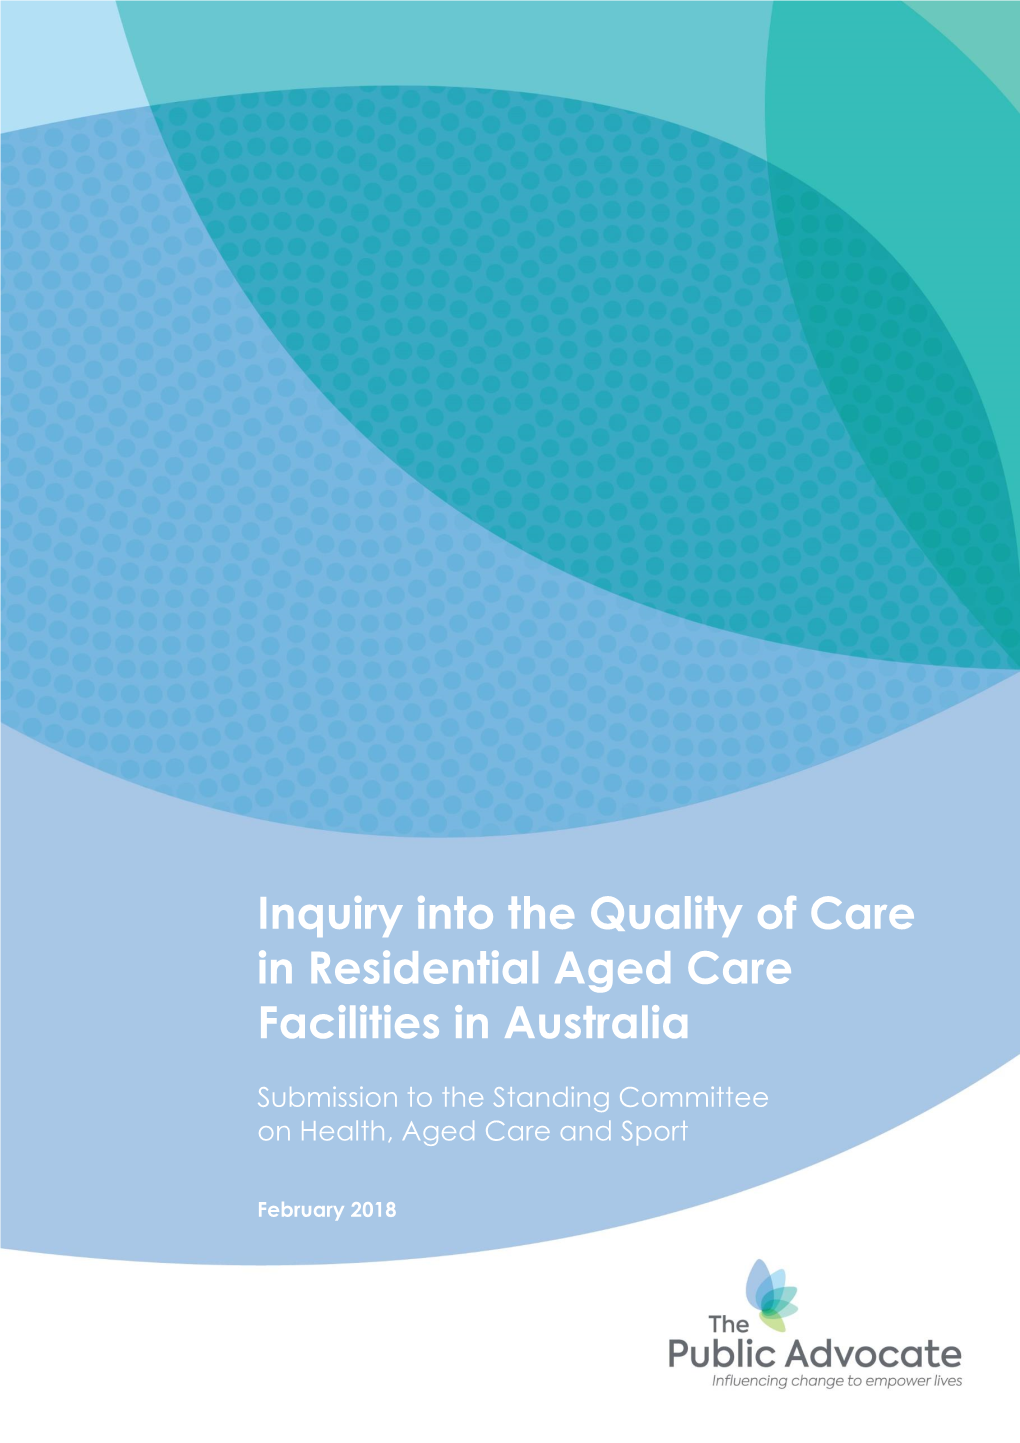 Inquiry Into the Quality of Care in Residential Aged Care Facilities in Australia